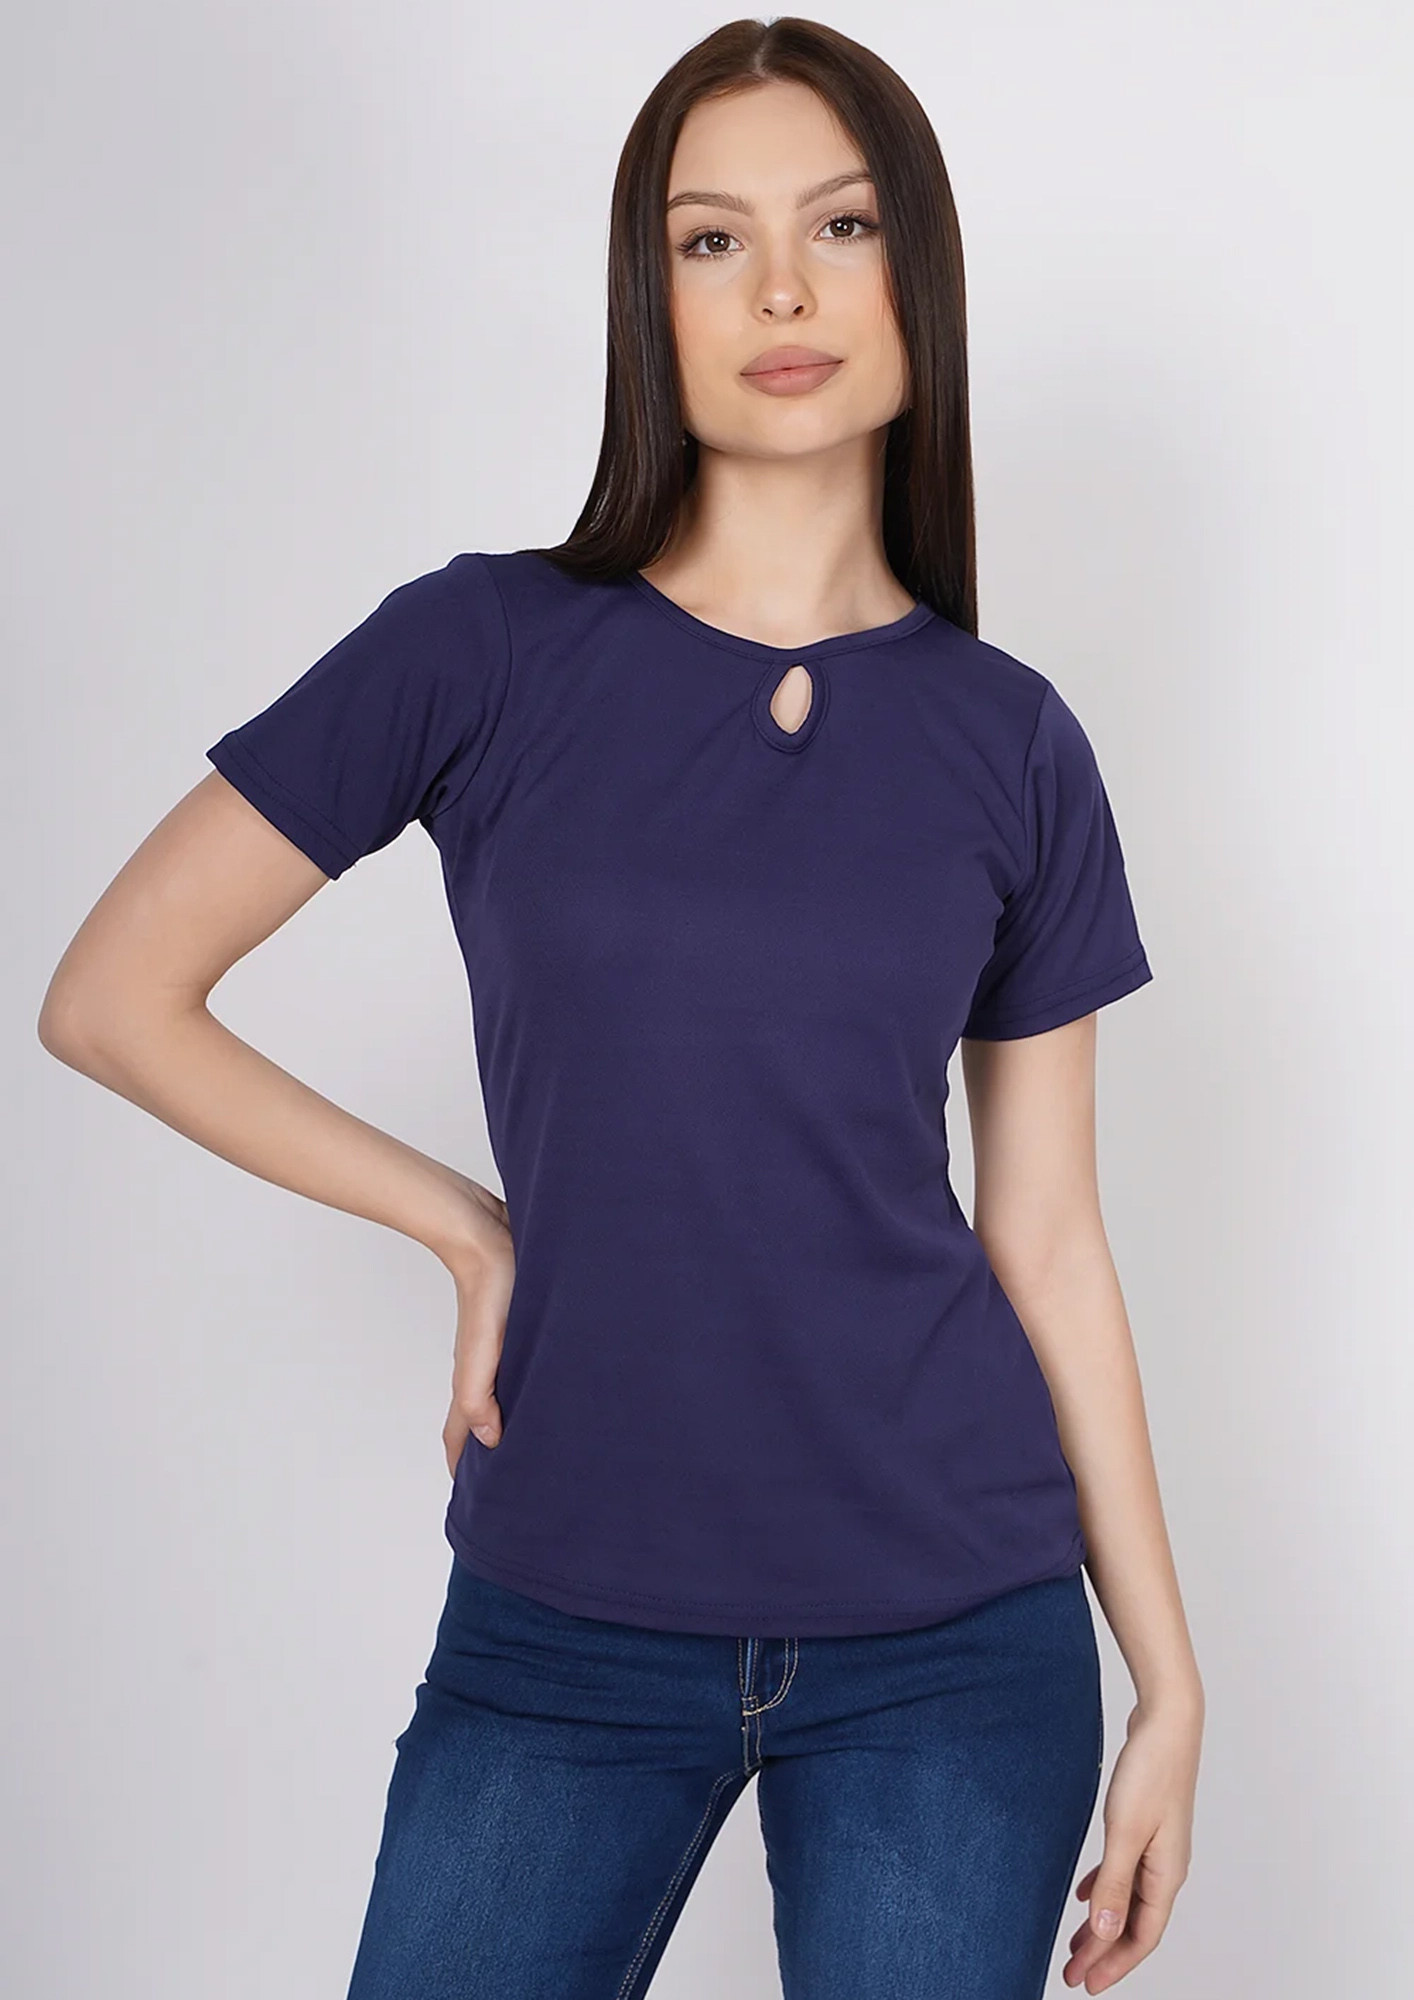 TAGGD Round neck Navy Blue Top